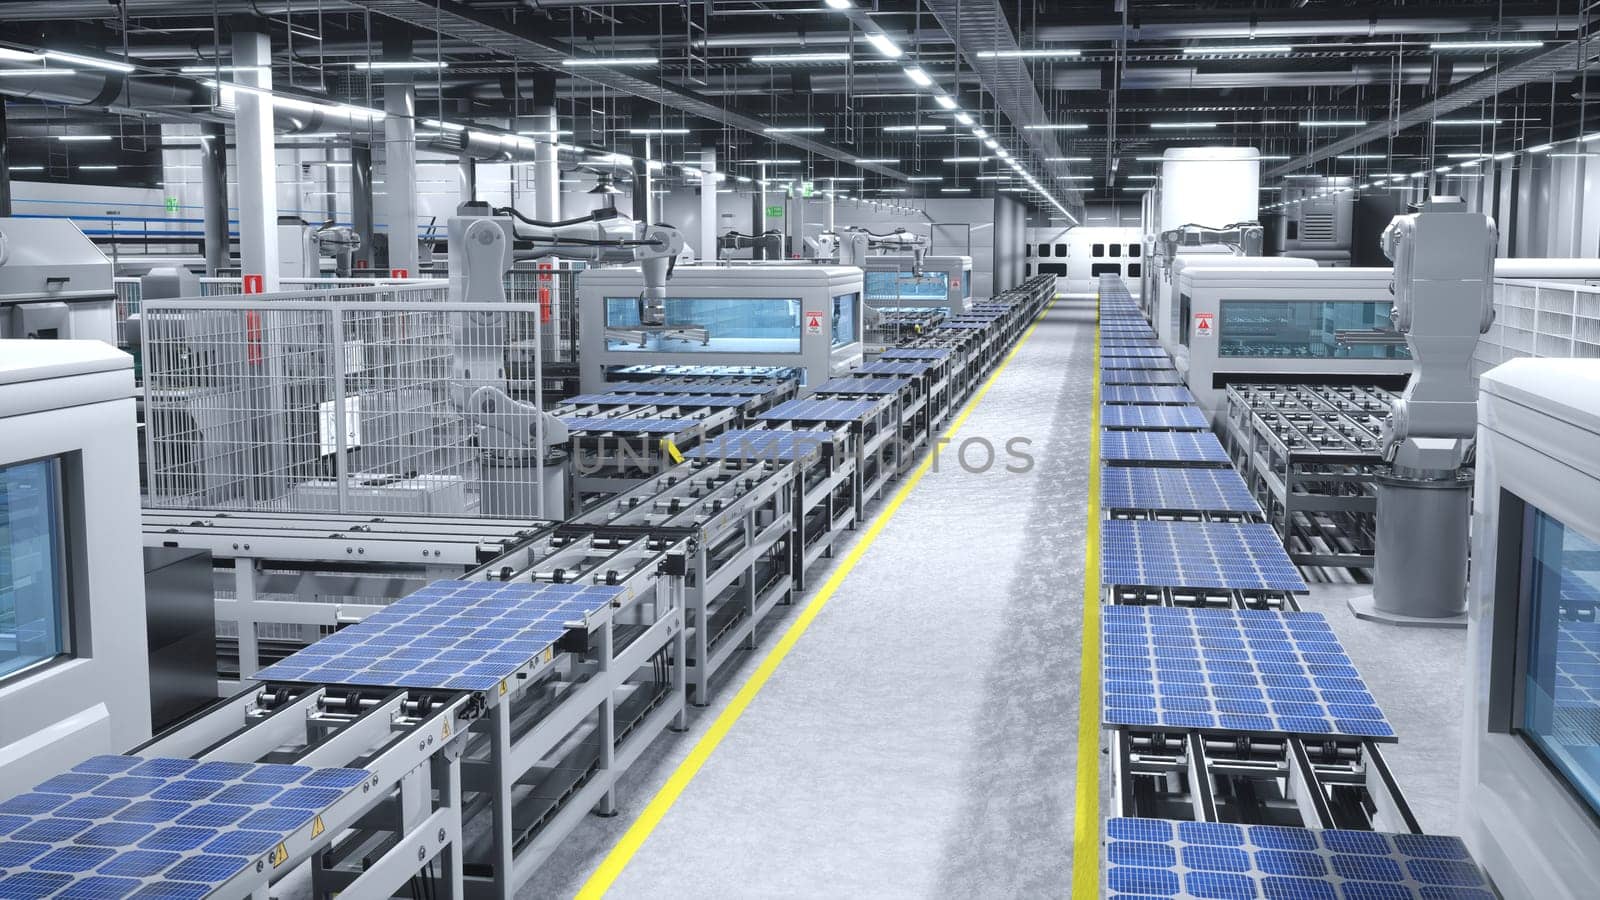 High tech manufacturing warehouse producing solar cells by DCStudio